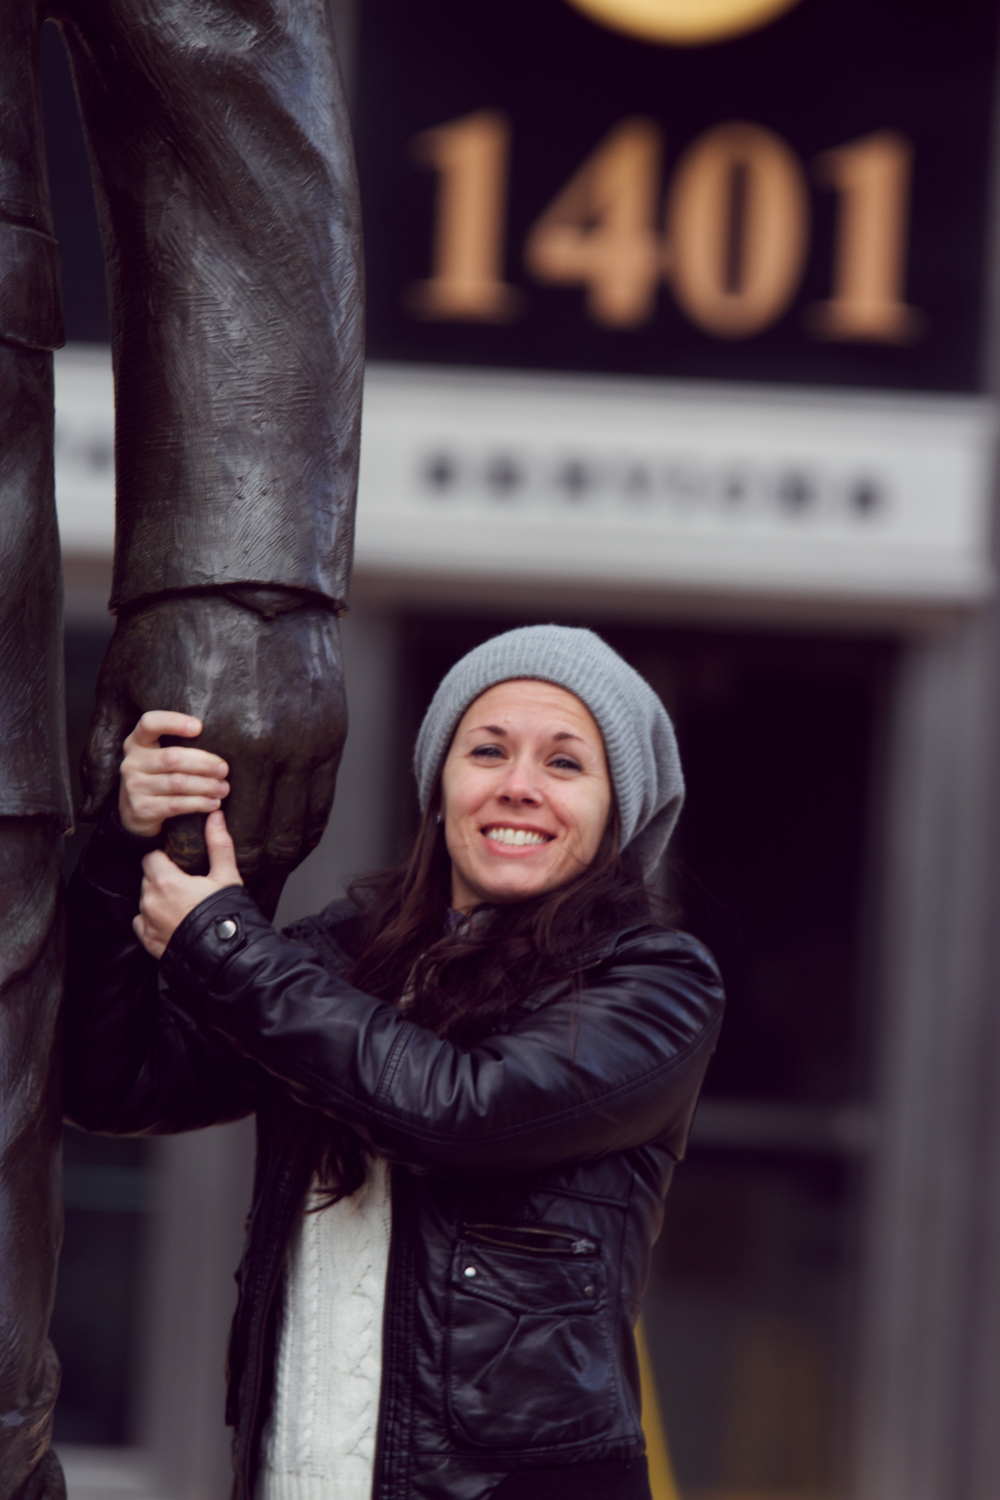  Heather posing with a statue of Frank Rizzo, one of Philadelphia's most corrupt mayors 